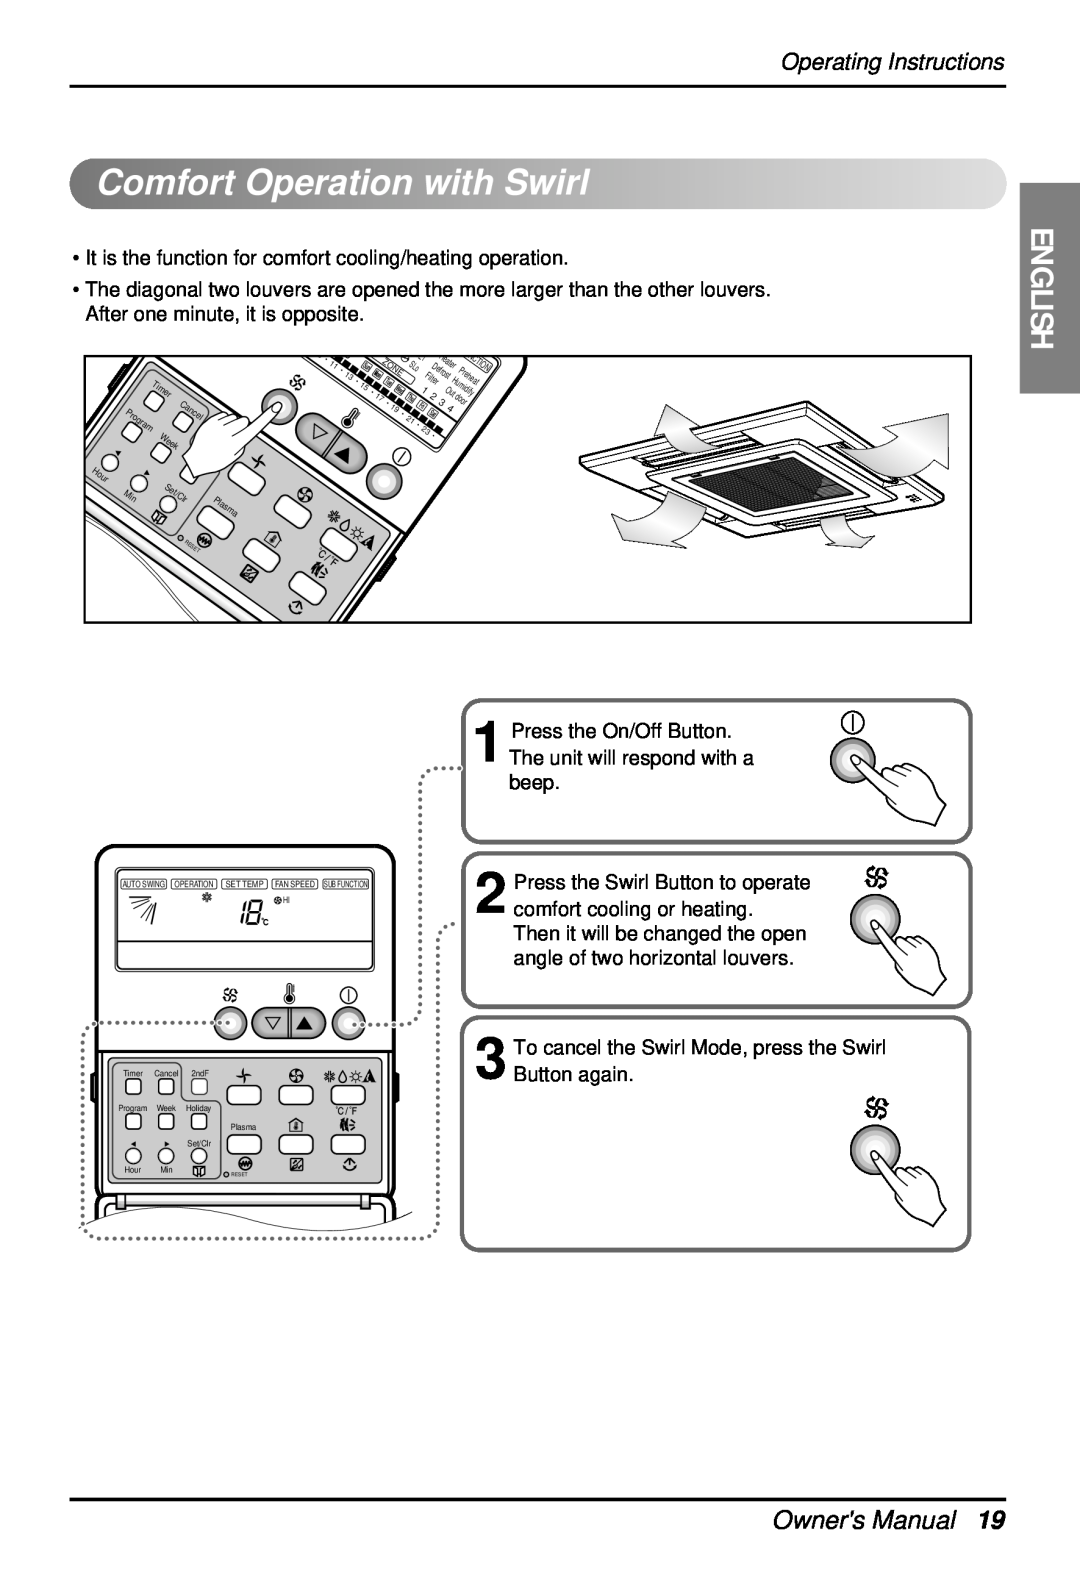 LG Electronics 3828A22005P owner manual Comfort OperationwithSwirl, English, Owners Manual, Operating Instructions 